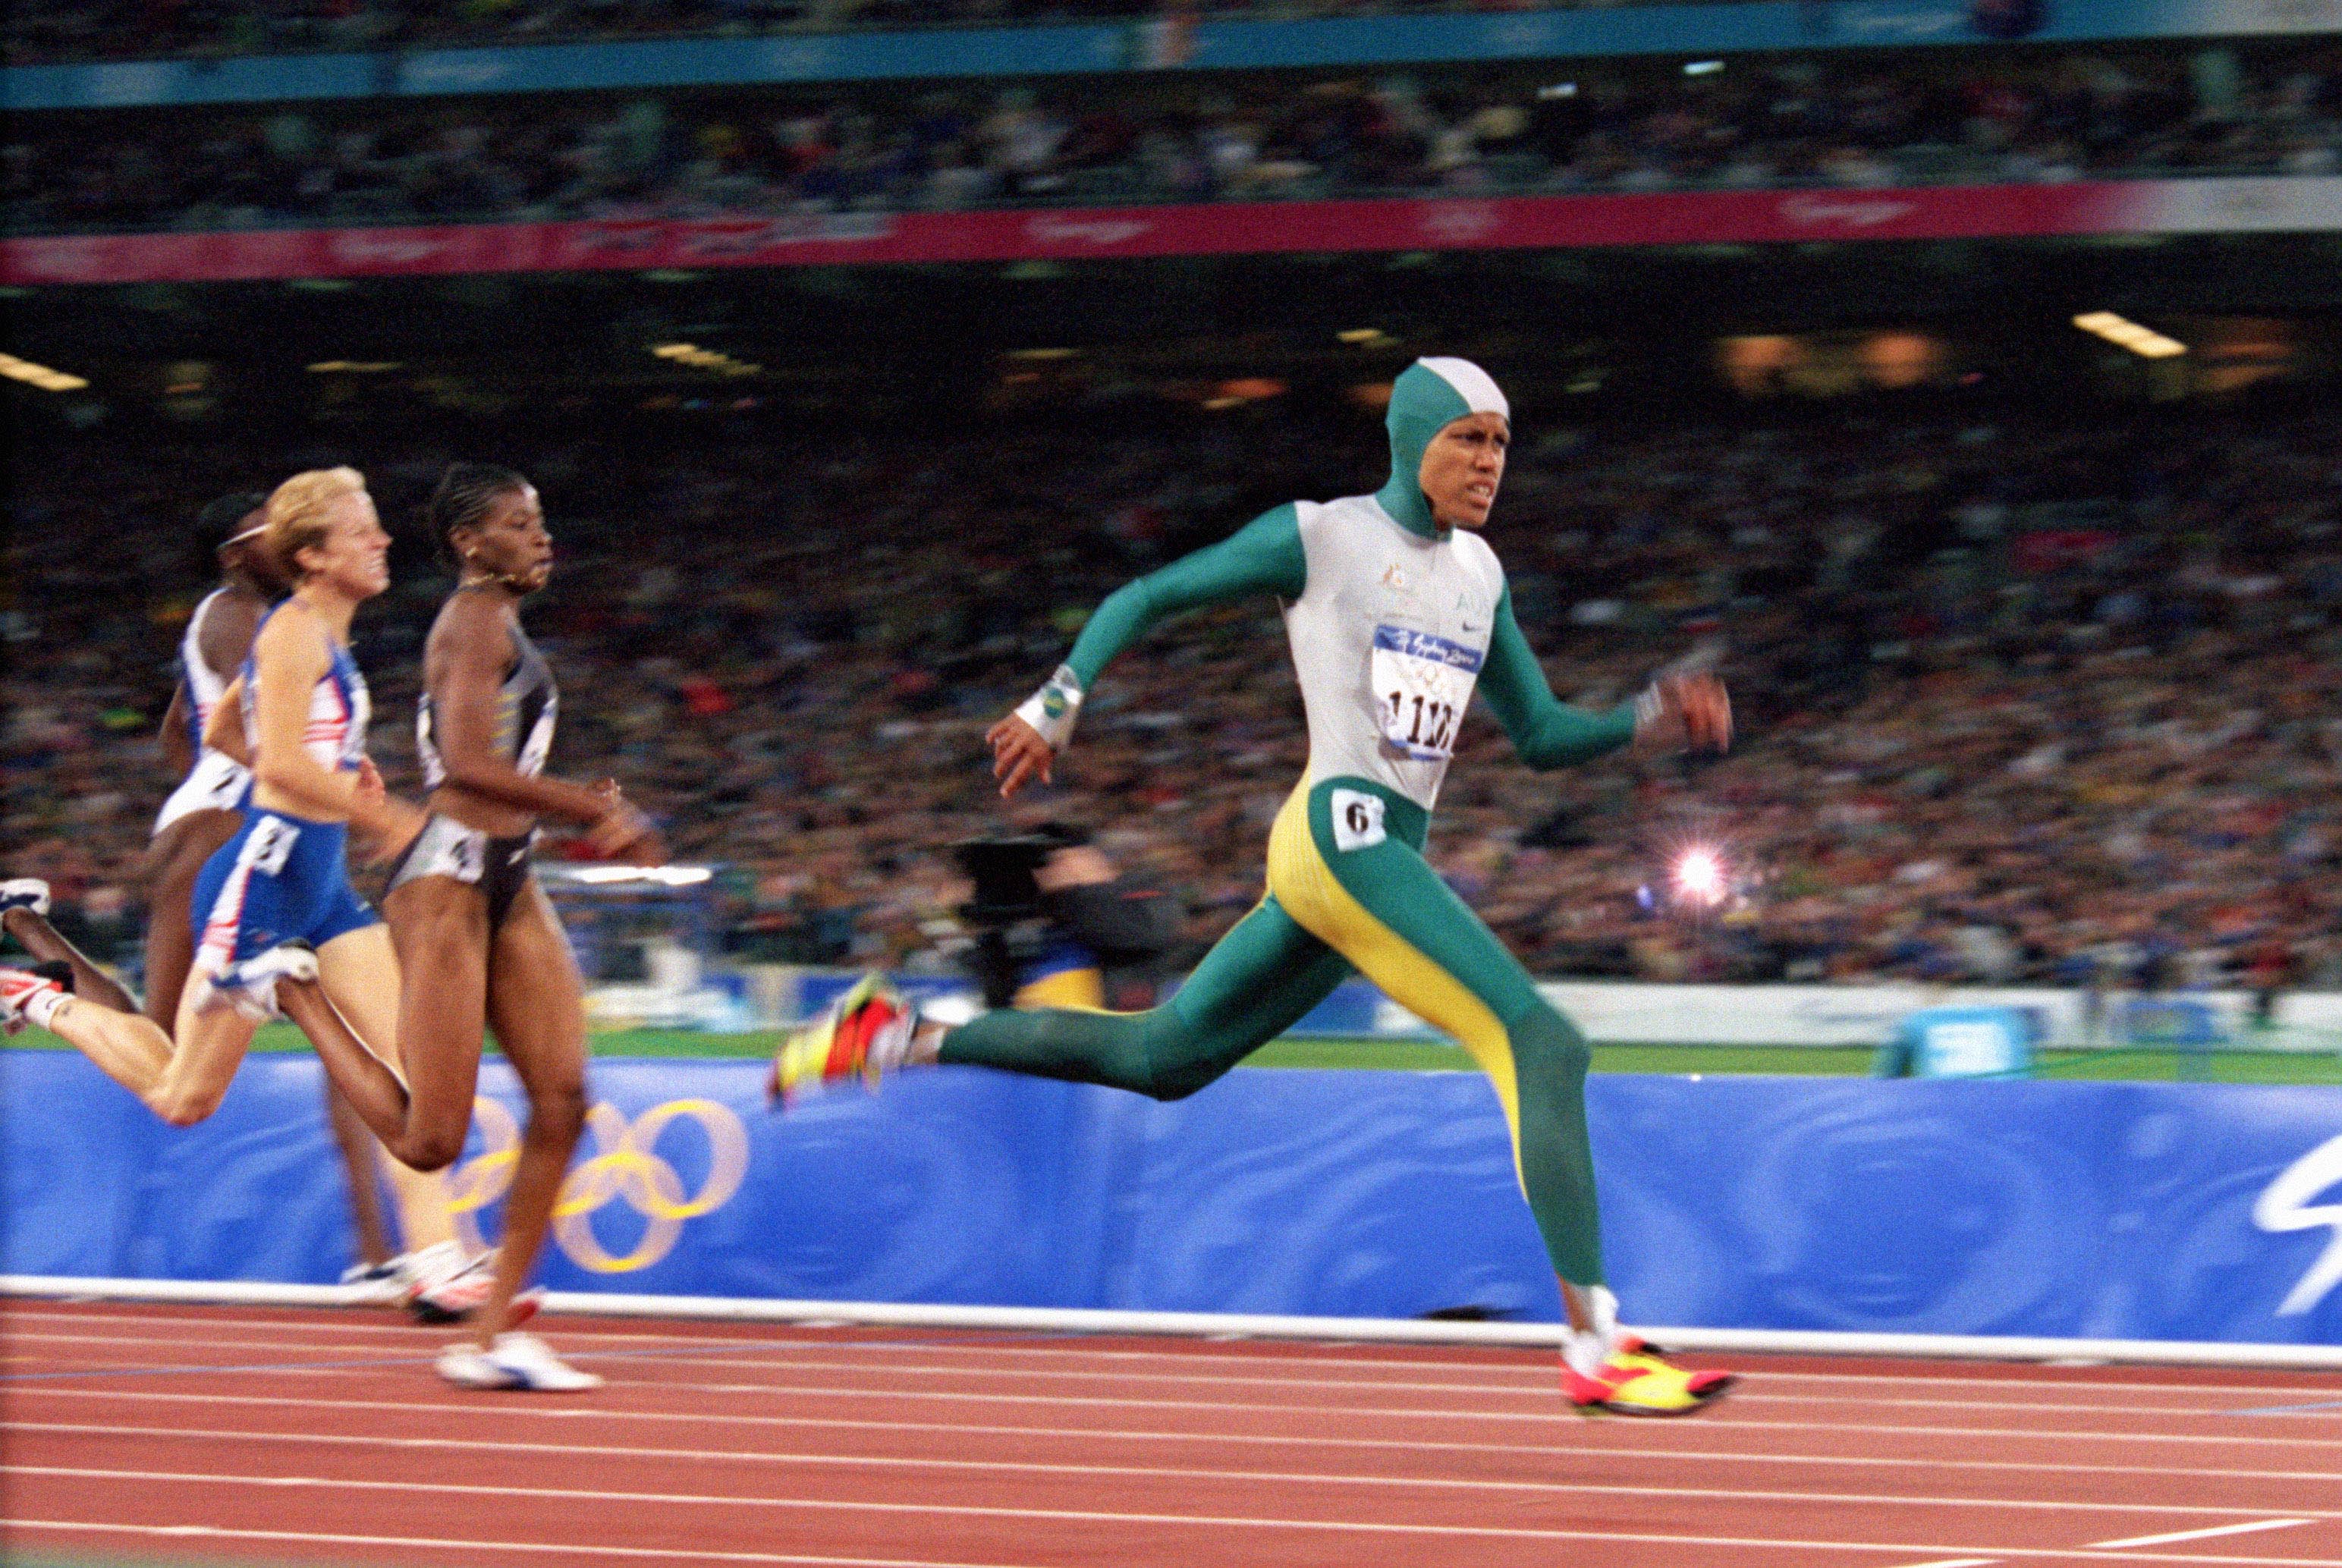 Cathy Freeman in action at the 2000 Sydney Olympics,
                wearing her iconic green and gold body suit and white cap,
                dominating the track event with fierce competition in the
                backdrop.